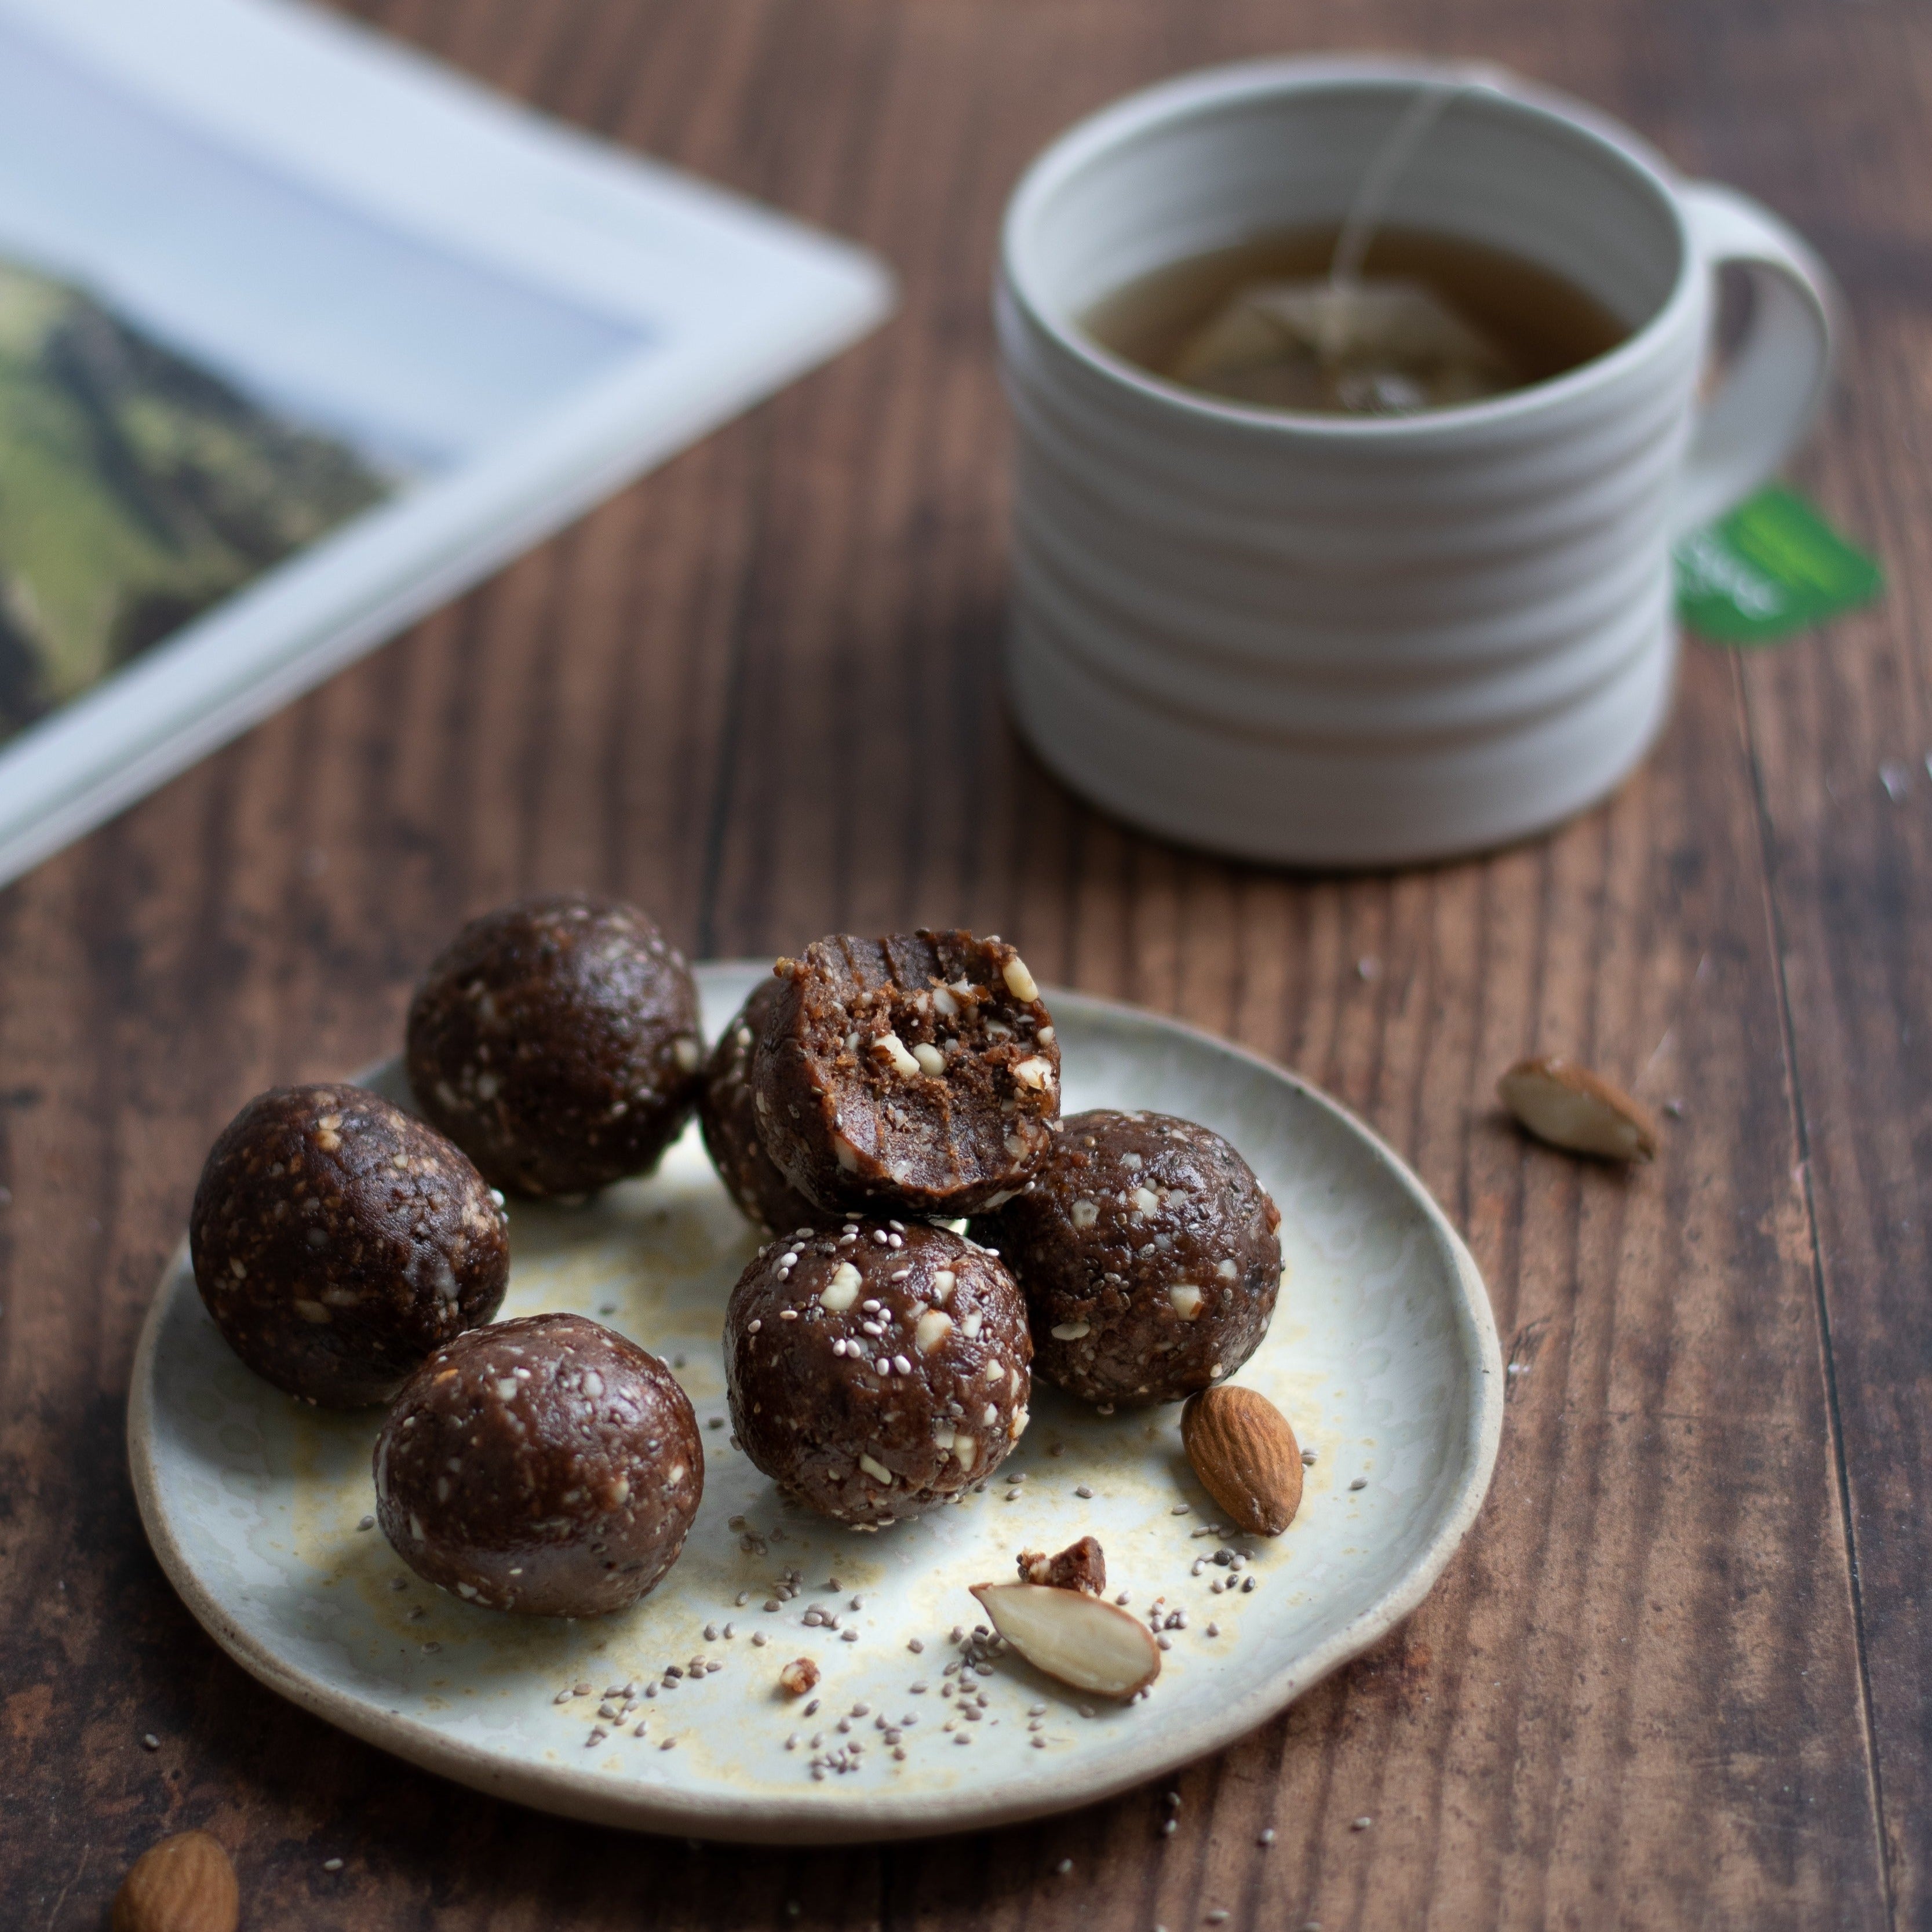 Baobab & Cacao Energy Balls on a plate next to a cup of herbal tea